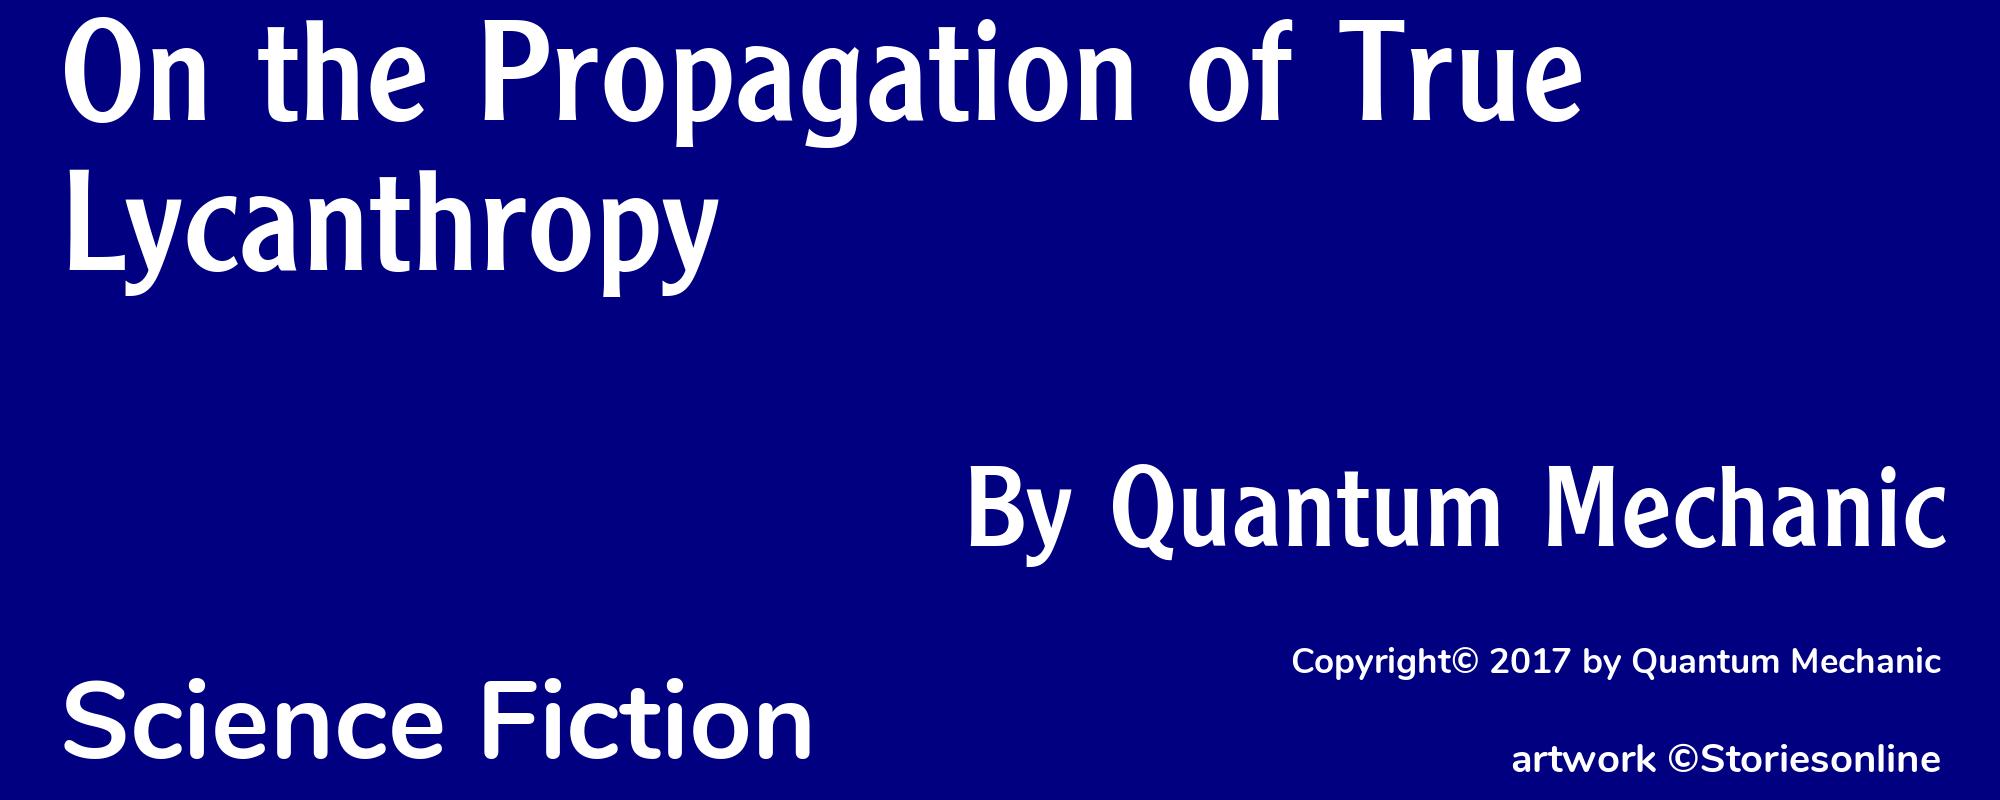 On the Propagation of True Lycanthropy - Cover